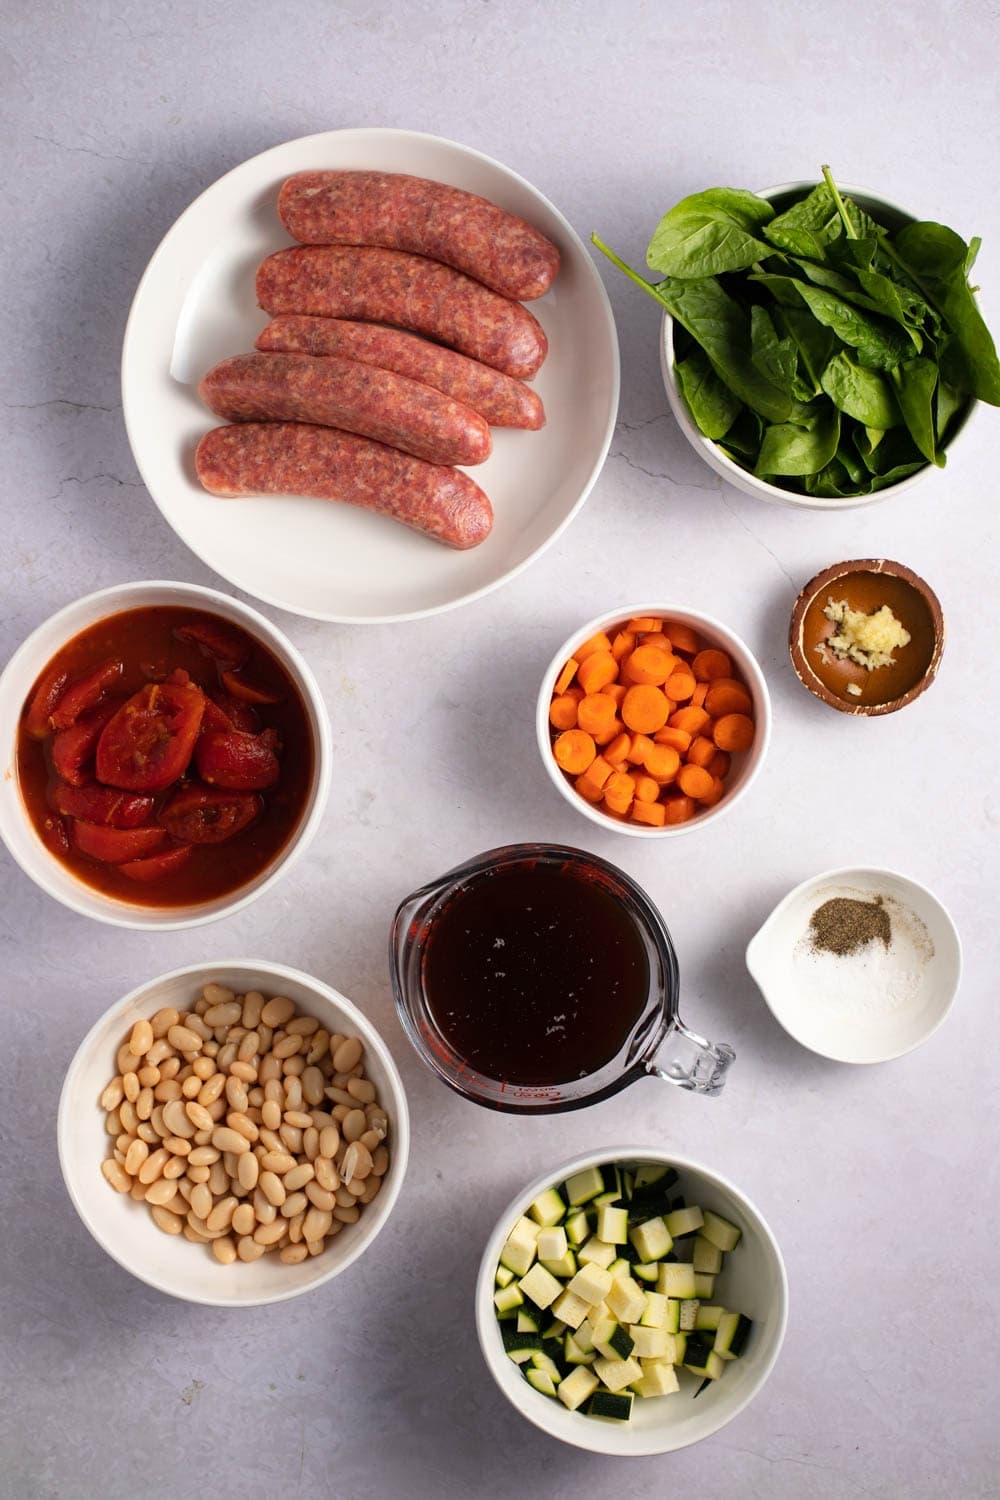 Italian Sausage Soup Ingredients - Sausage, Beans, Beef Stock, Italian Stewed Tomatoes, Veggies, Minced Garlic, Parmesan Cheese and Spices